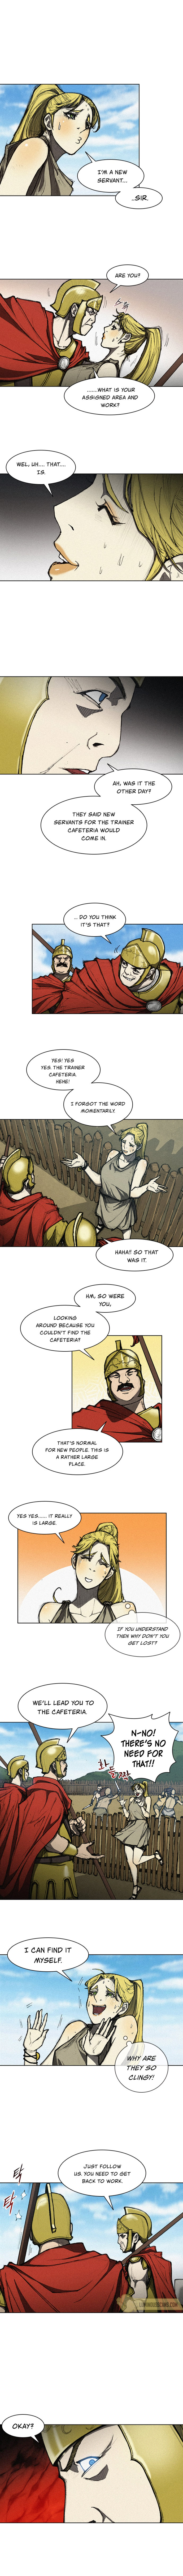 The Long Way Of The Warrior - Chapter 8 Page 6